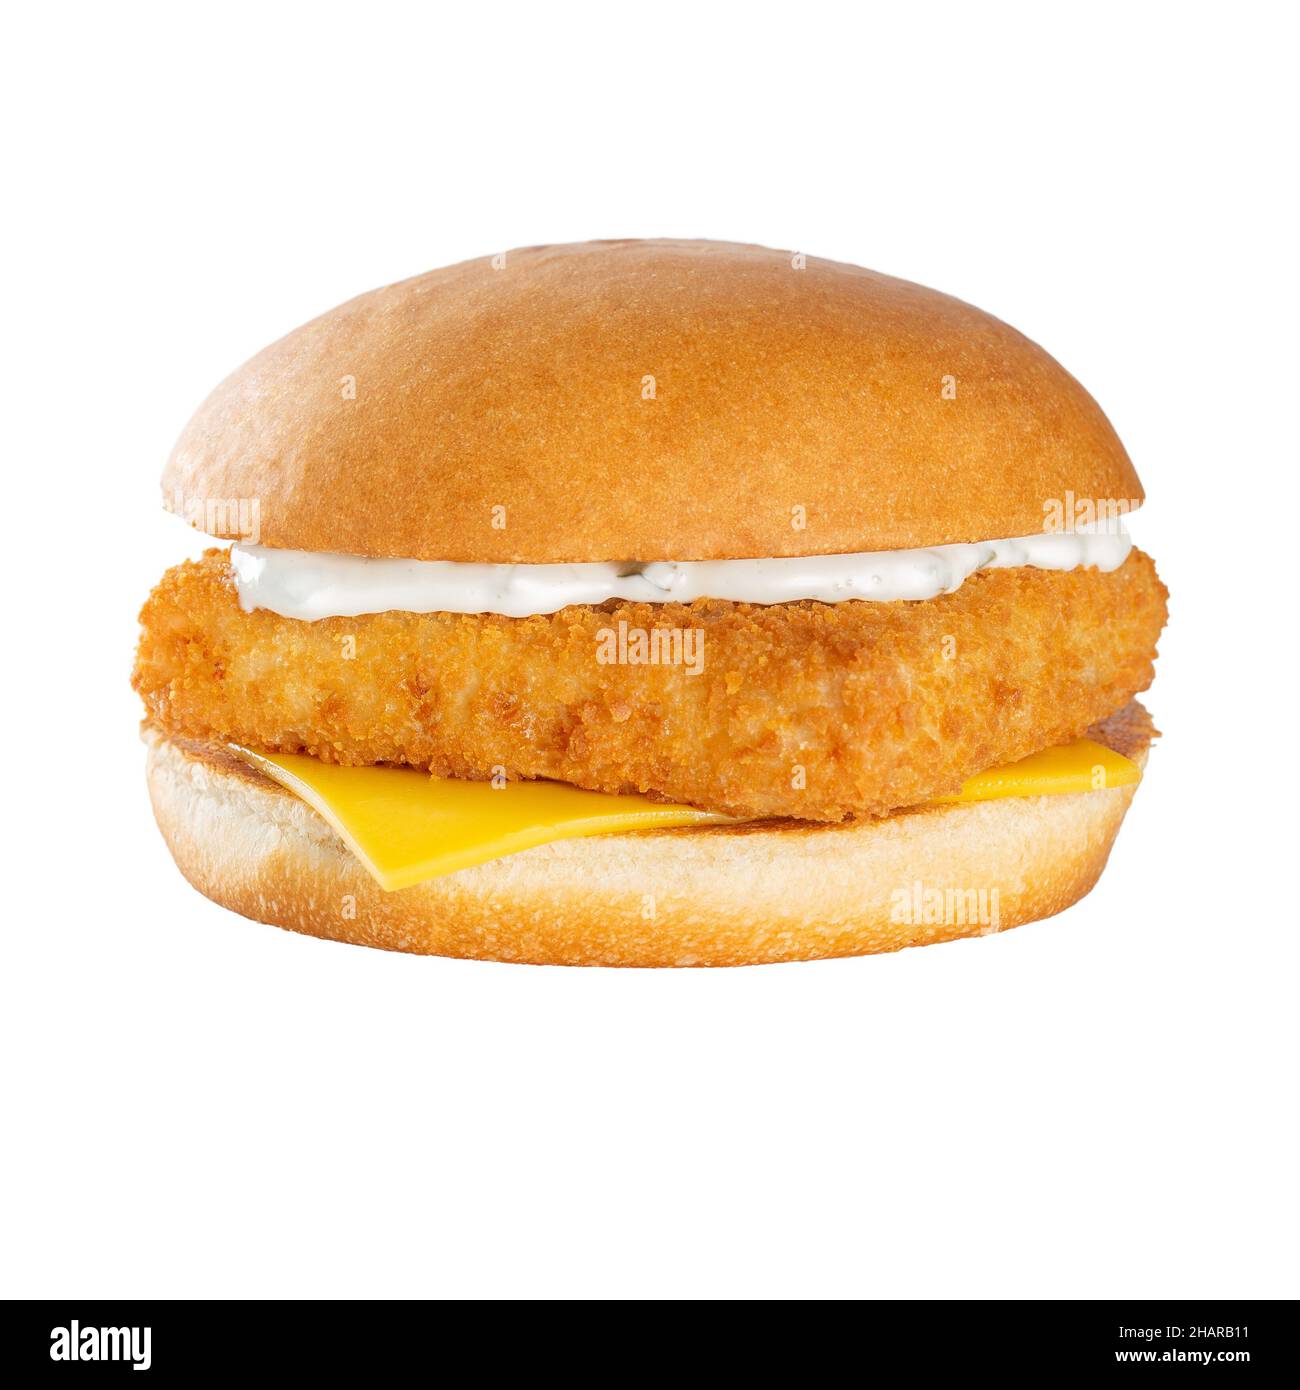 Fish burger with white sauce and cheddar cheese. Stock Photo